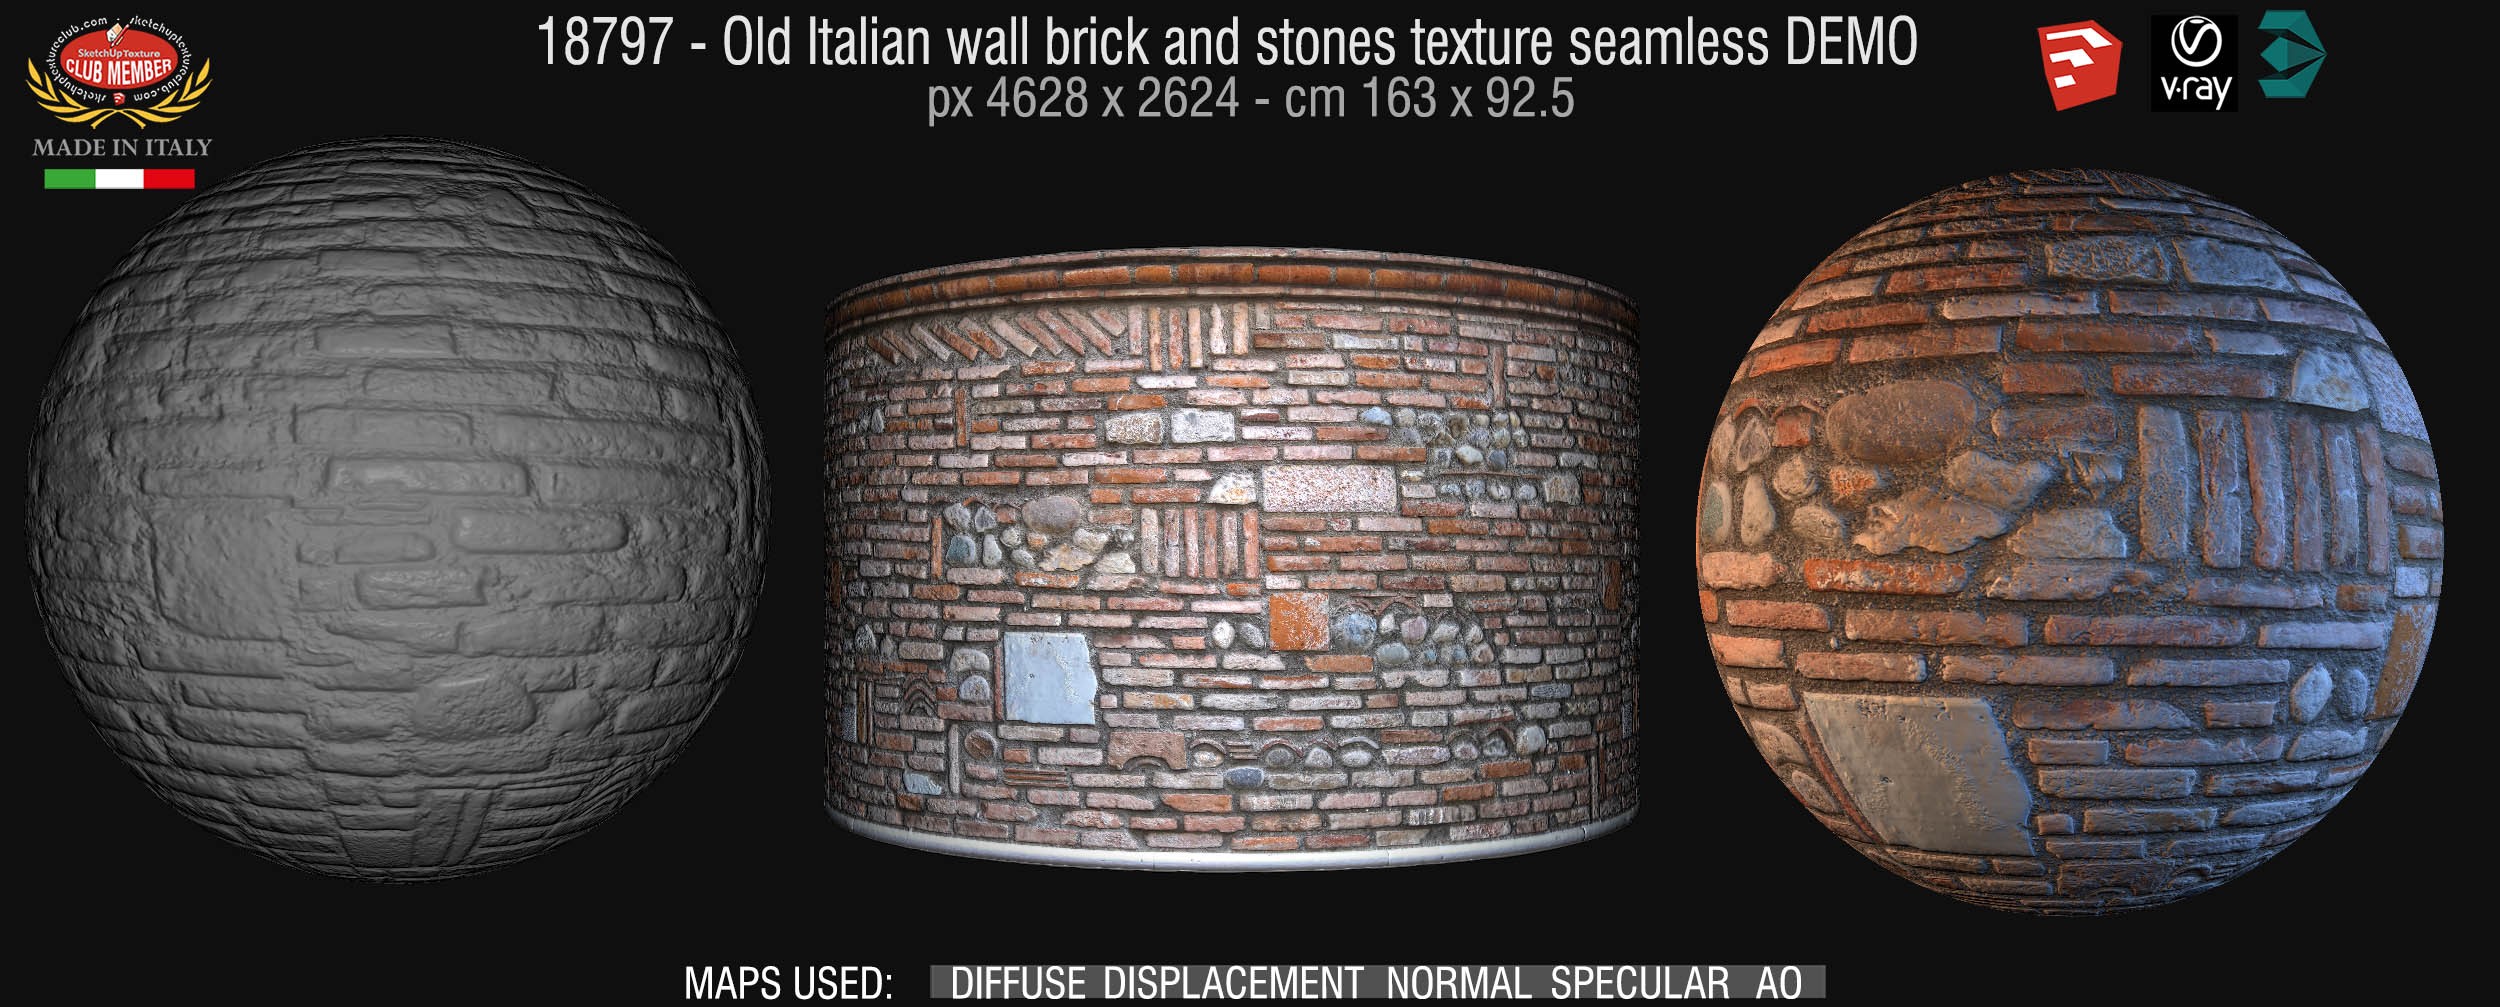 18797 Old Italian wall brick and stones texture + maps DEMO